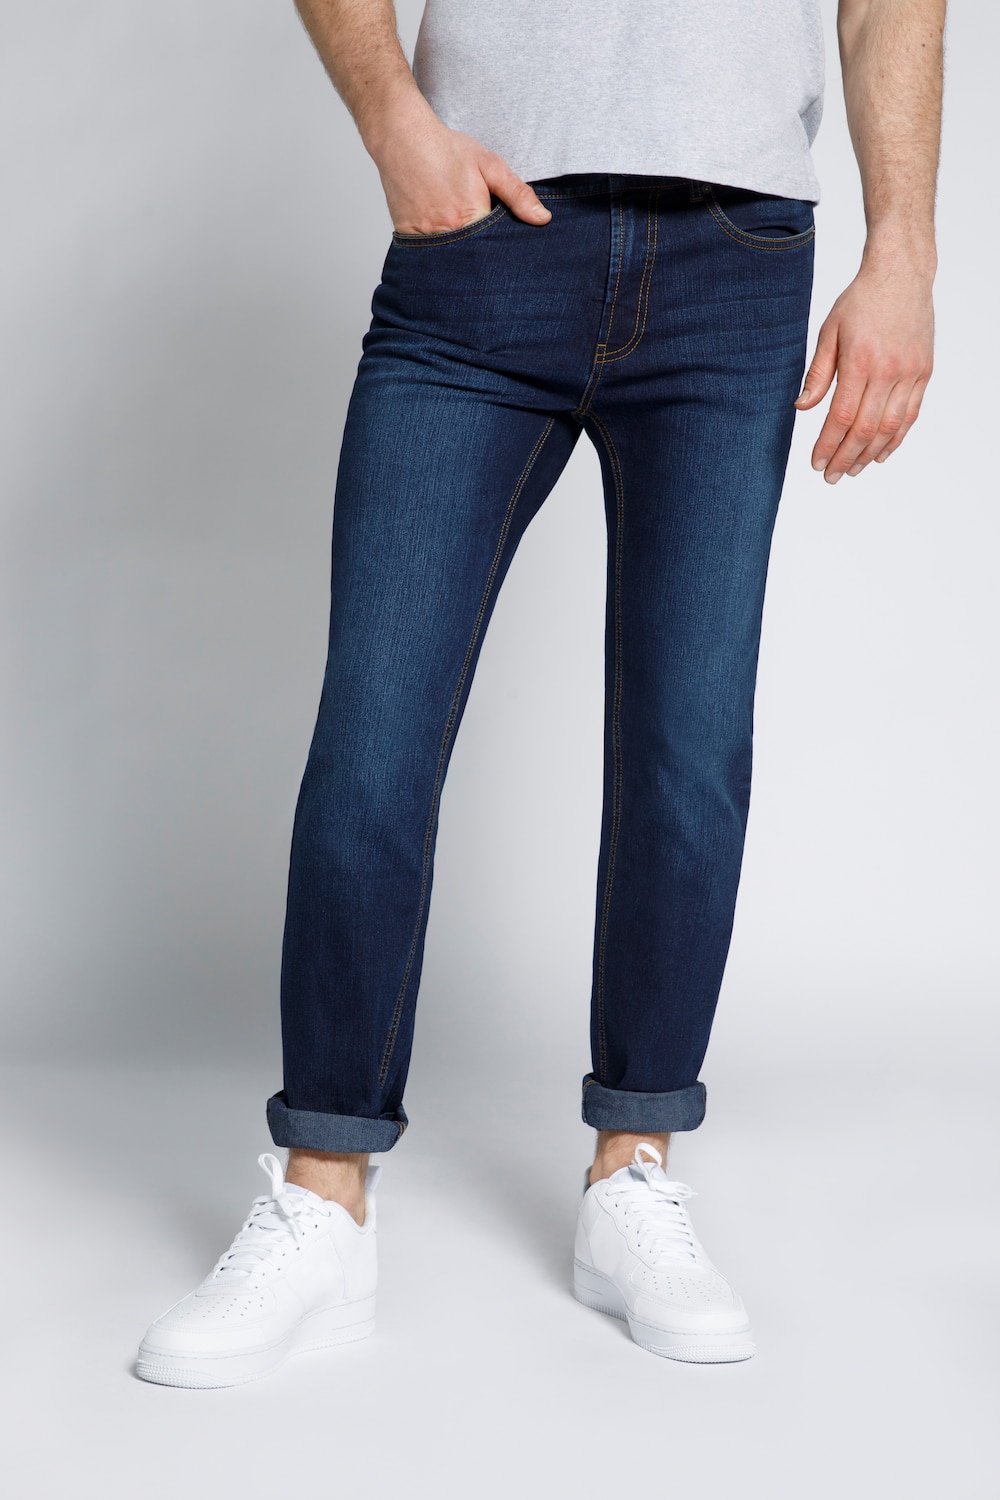 grandes tailles jean modern fit sthuge pour hommes, femmes, bleu, taille: 30, coton/polyester, sthuge